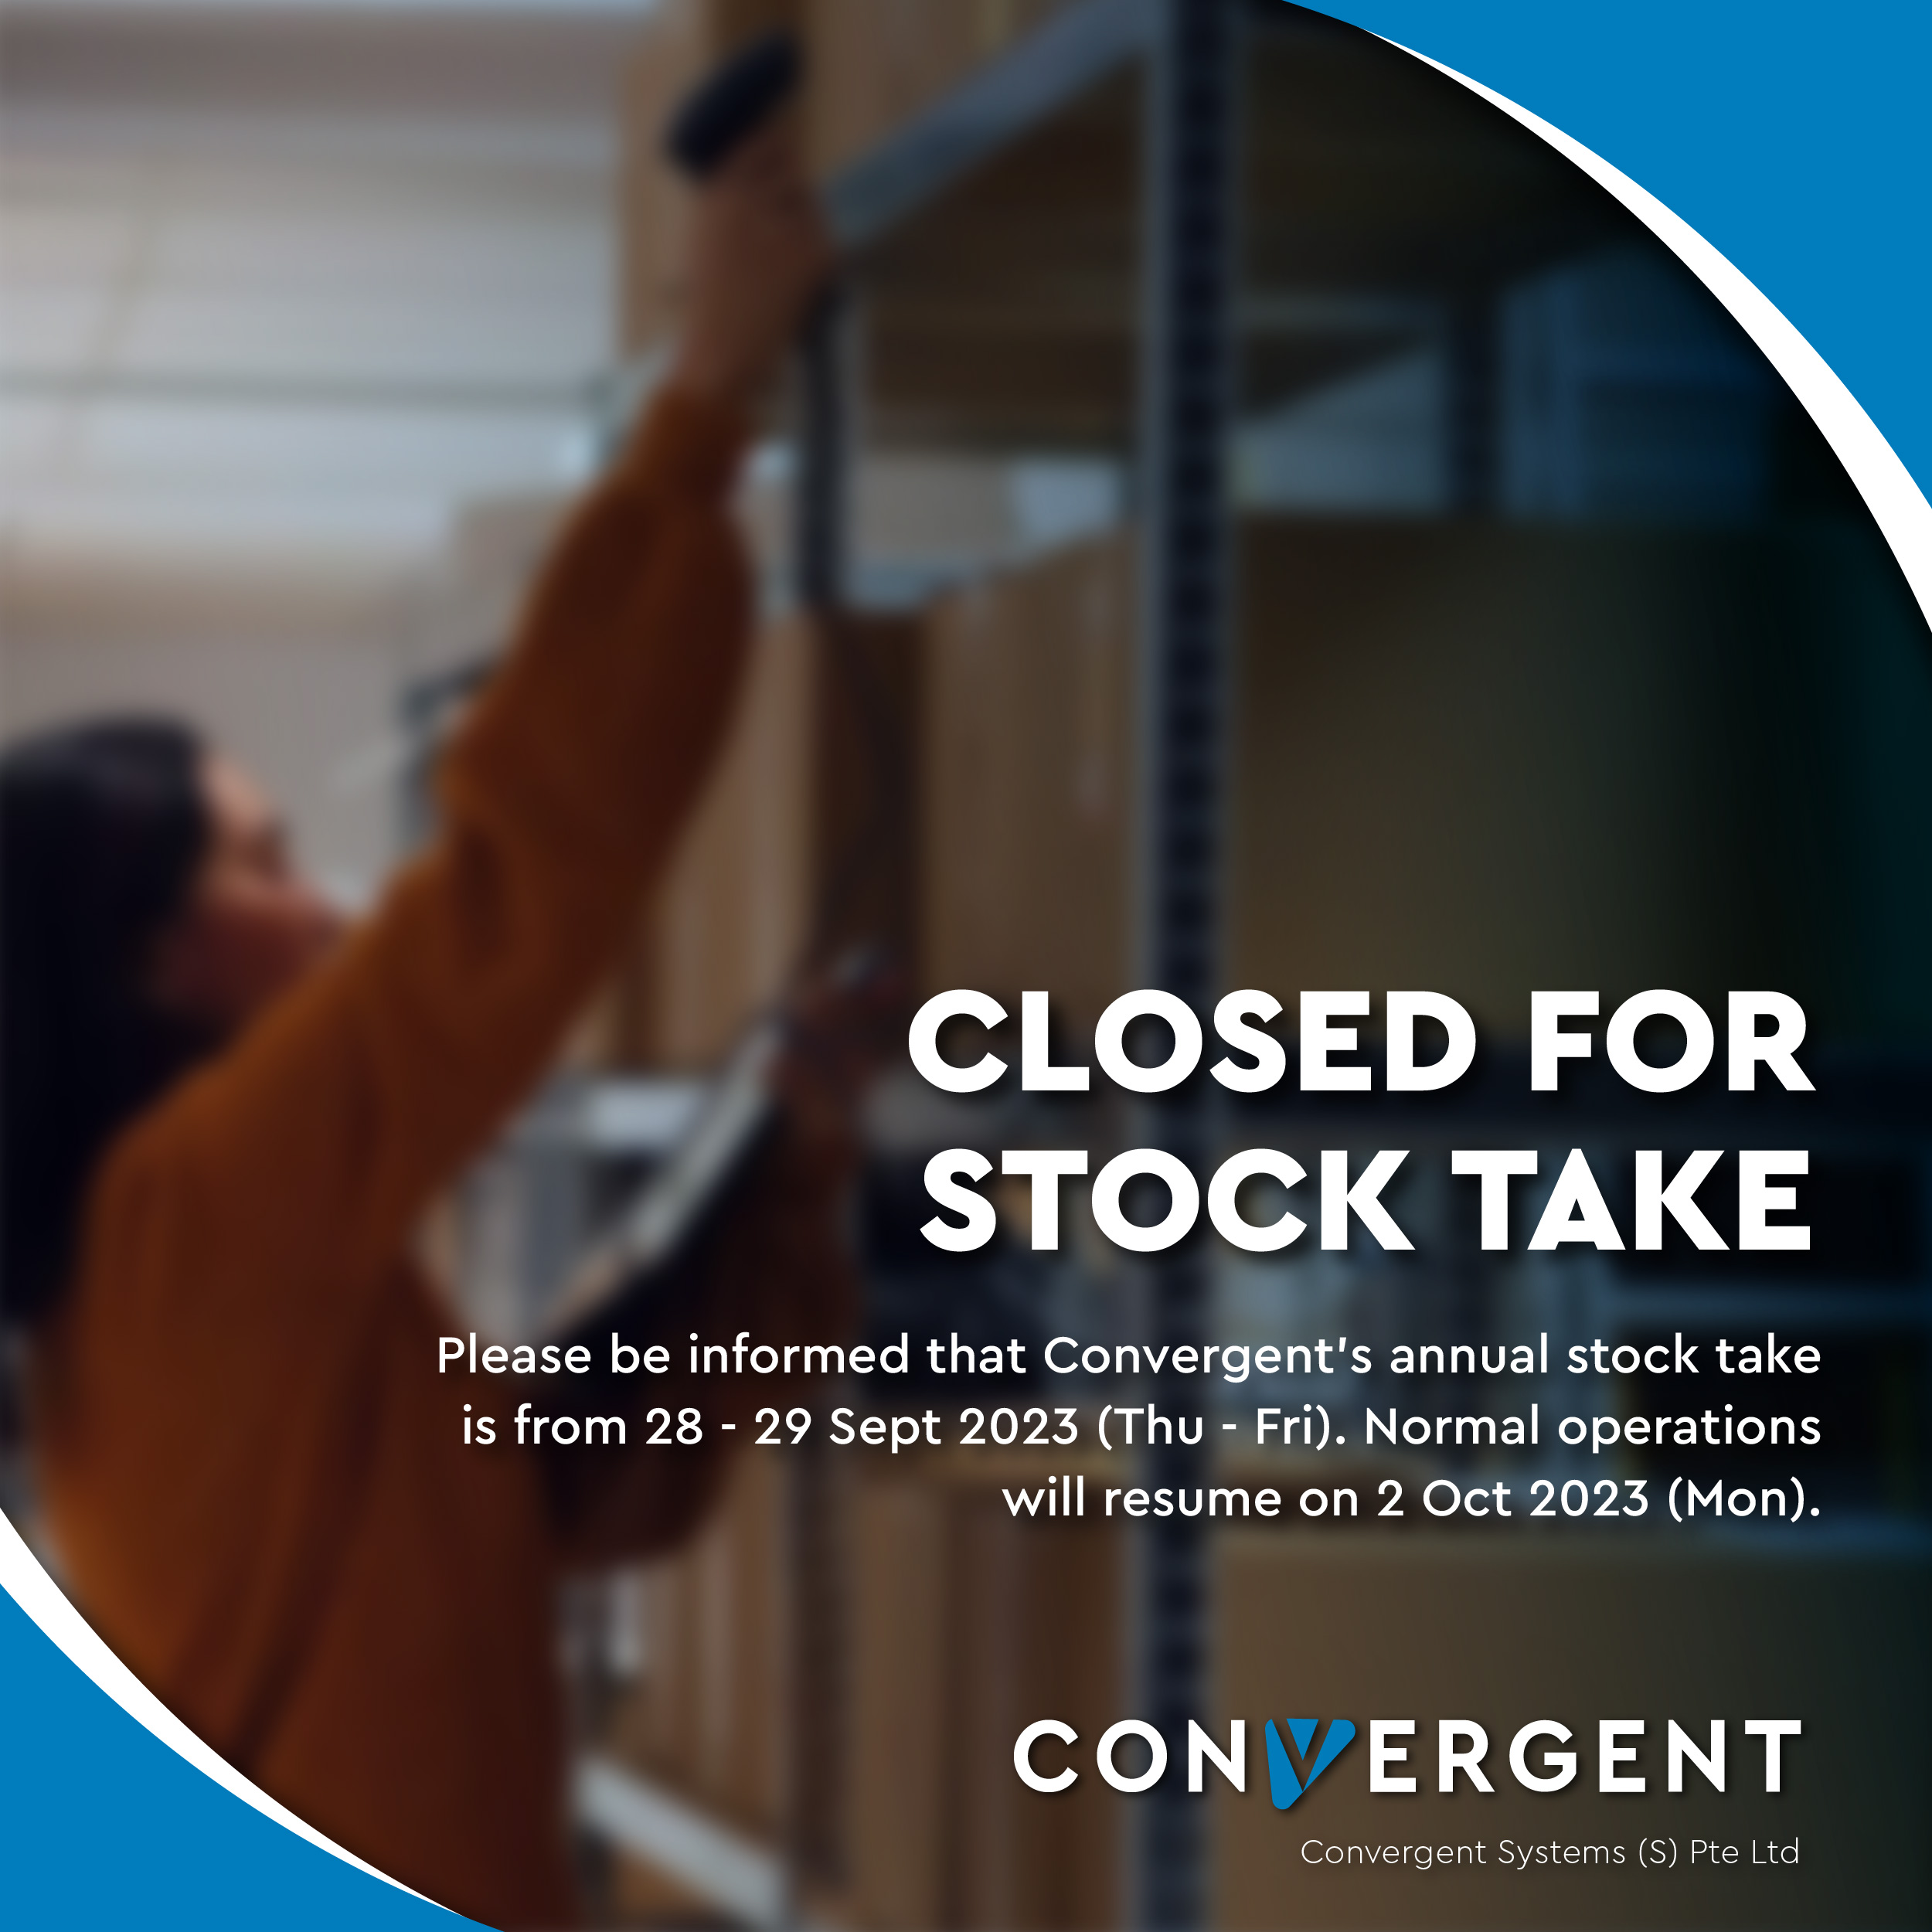 CLOSED FOR STOCK TAKE [28 – 29 Sept 2023]